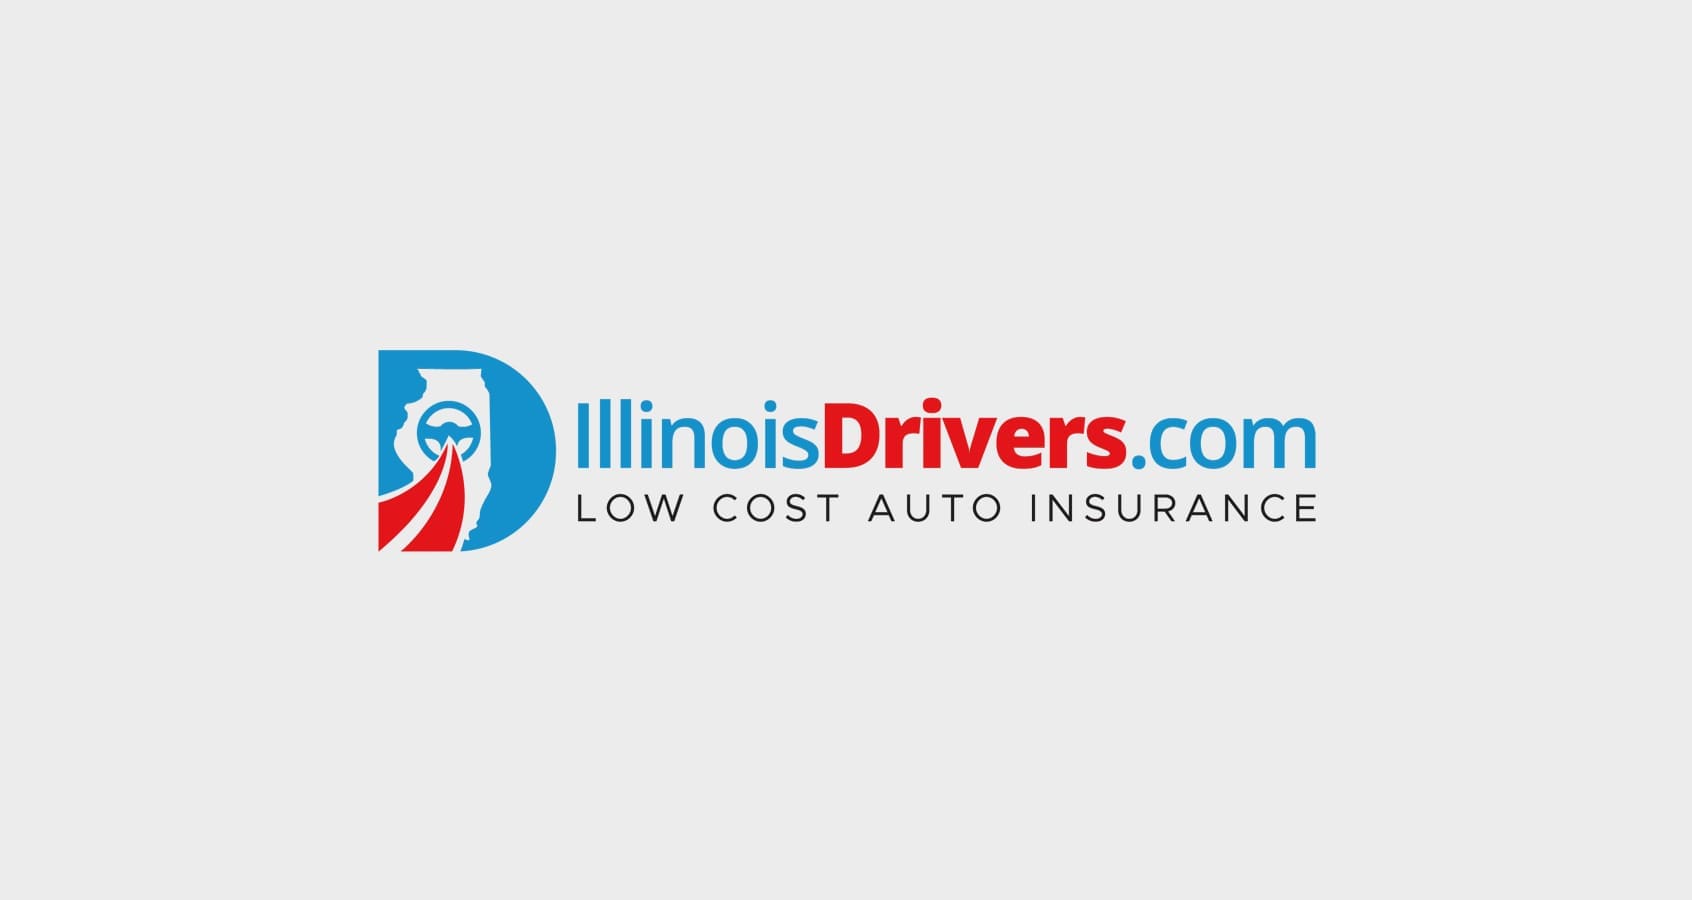 If my vehicle is “totaled,” or a total loss, will my coverage pay for a new vehicle?